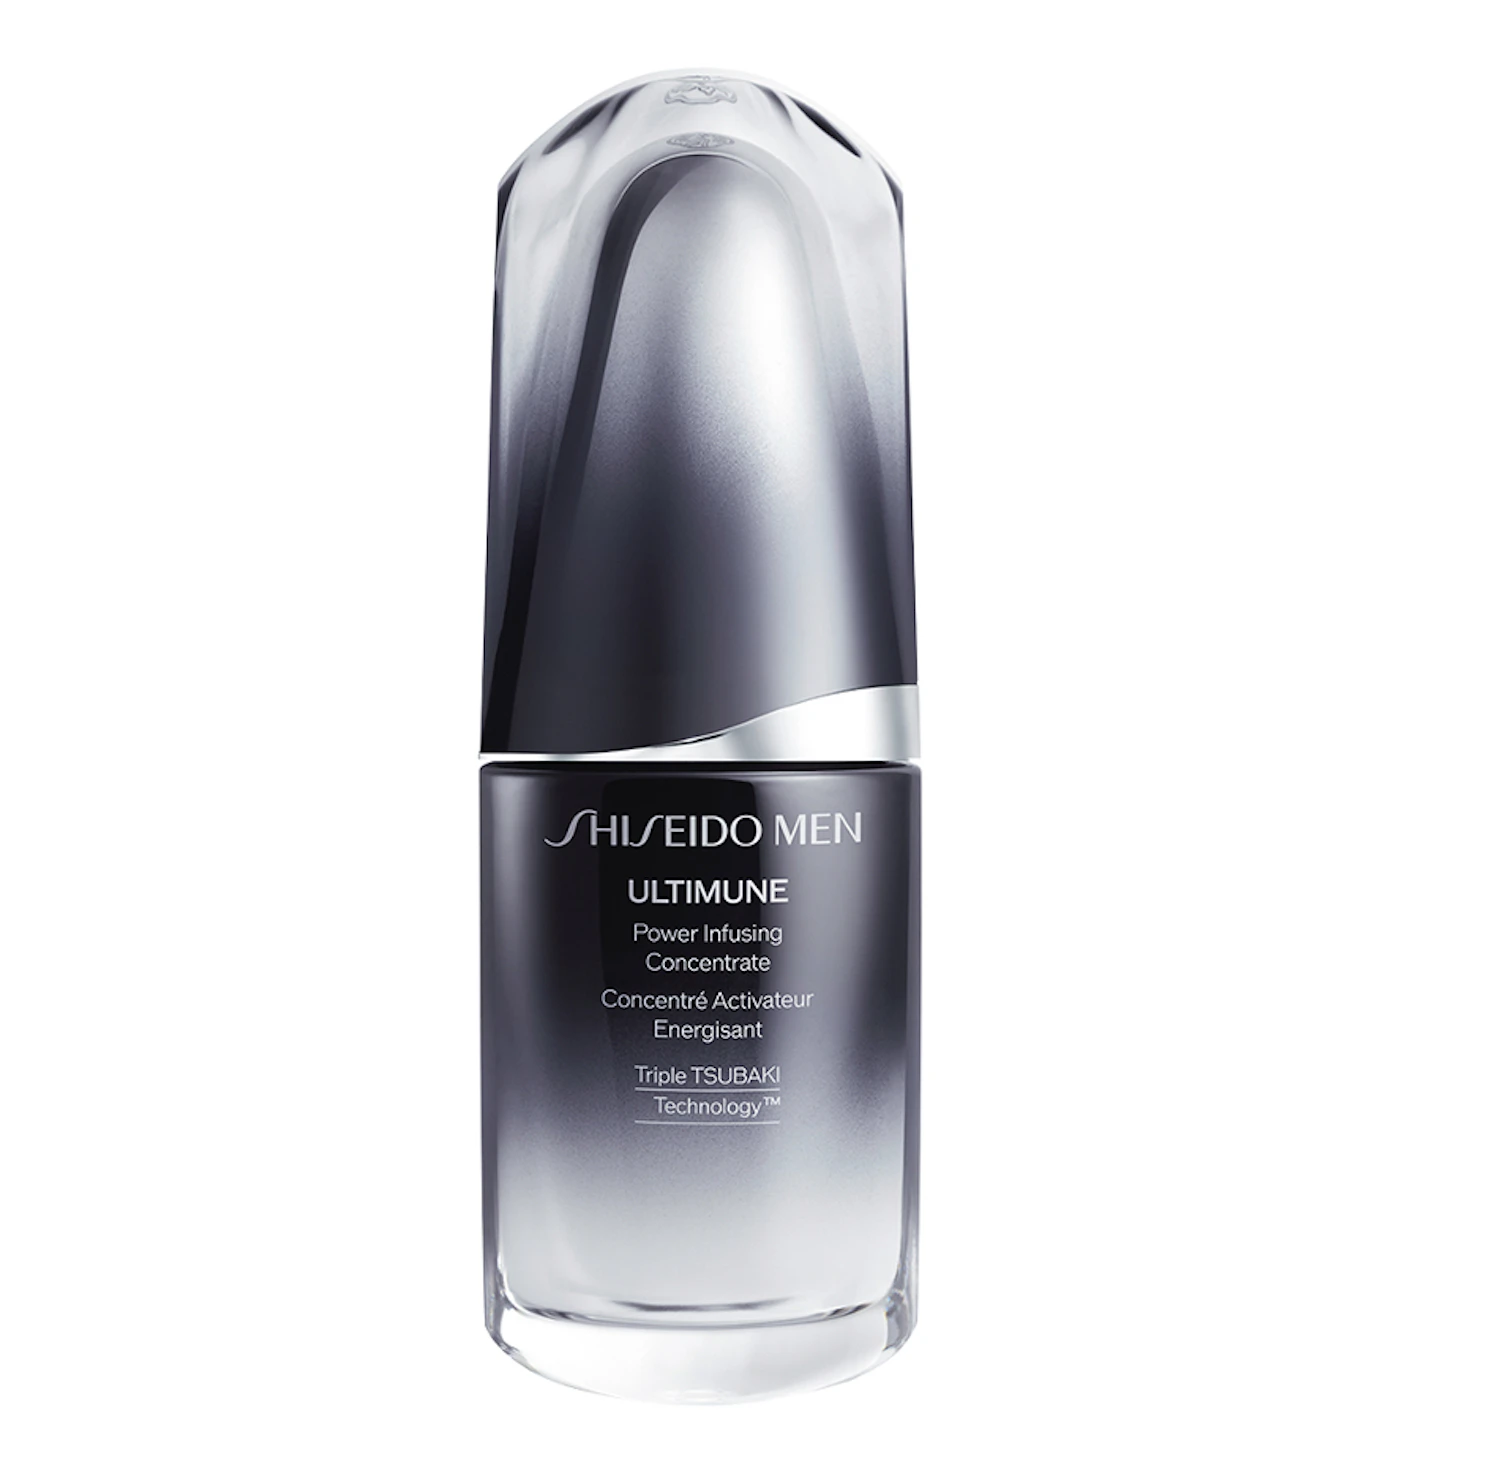 "Ultimune Powerizing Concentrate" 30ml 8,250 yen (tax included)